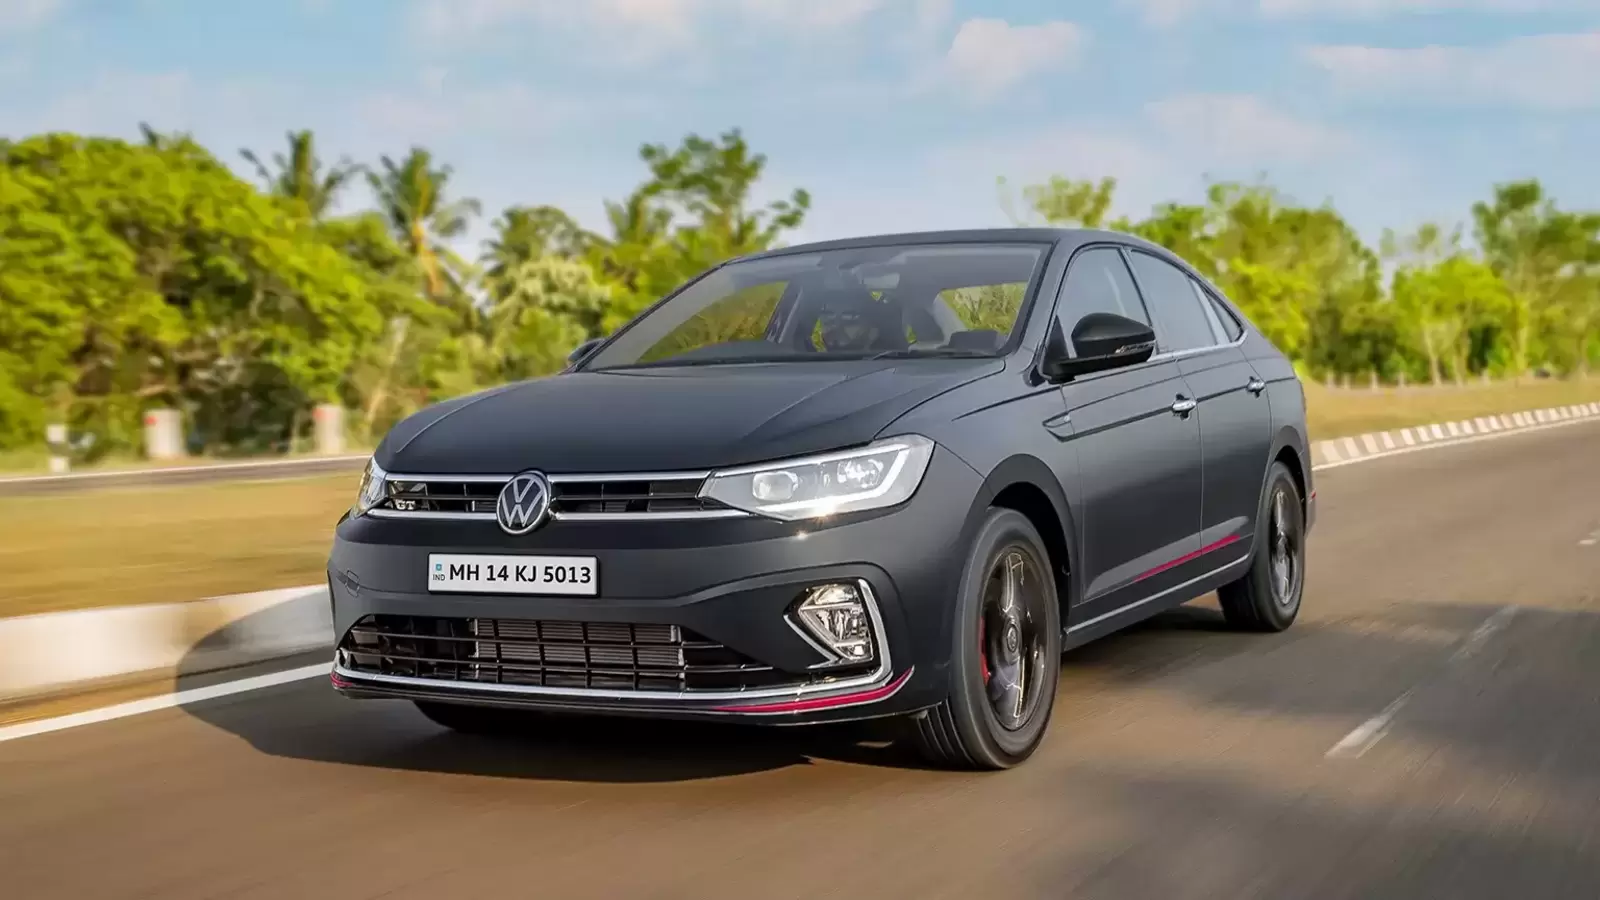 Volkswagen customers can now avail range of services through this new app